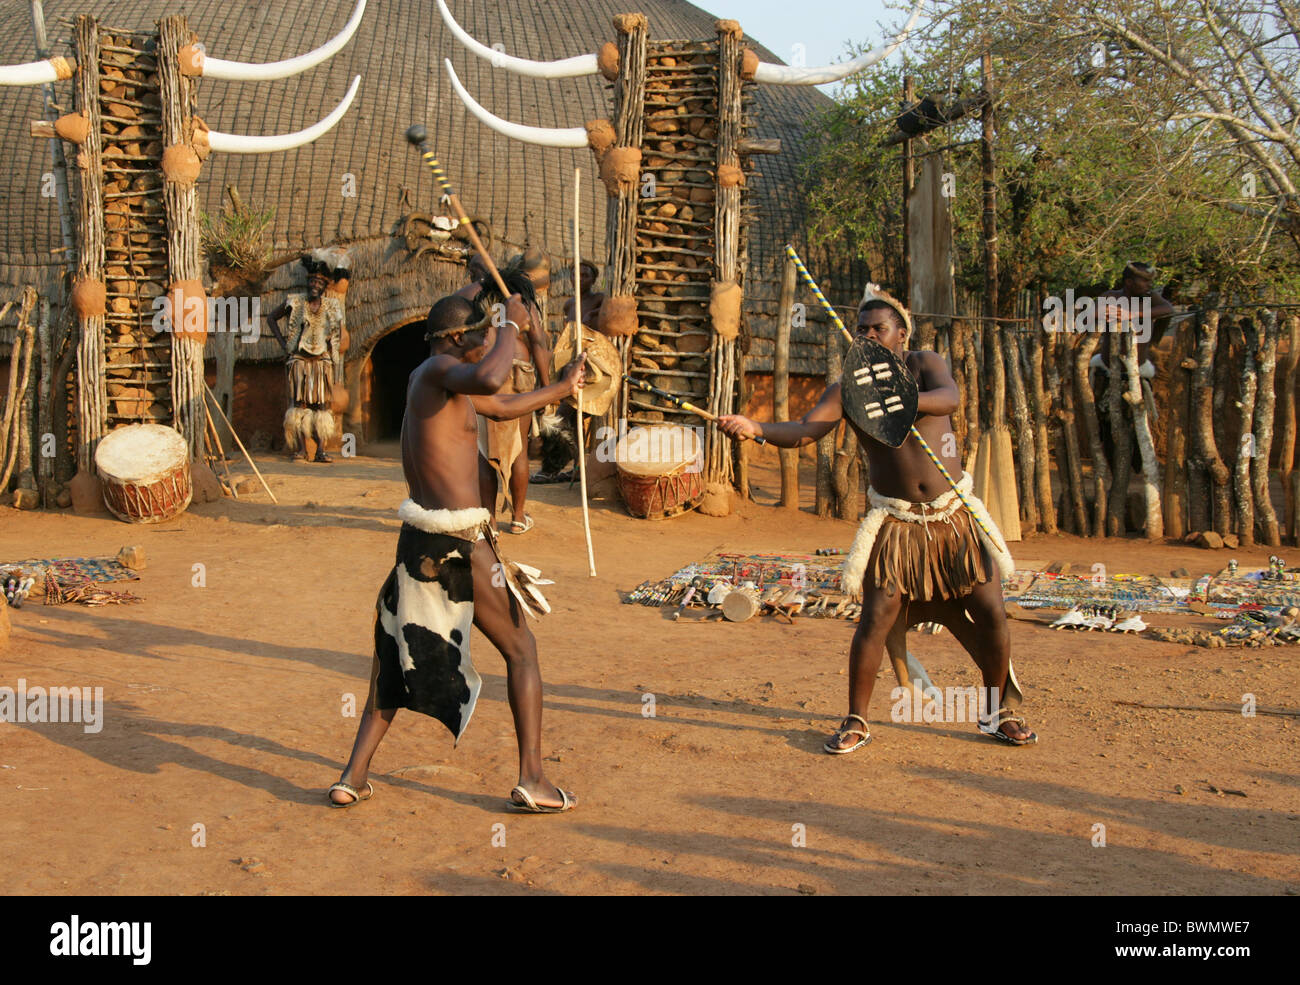 Traditional Nguni Stick Fighting Lives On In Today's South Africa